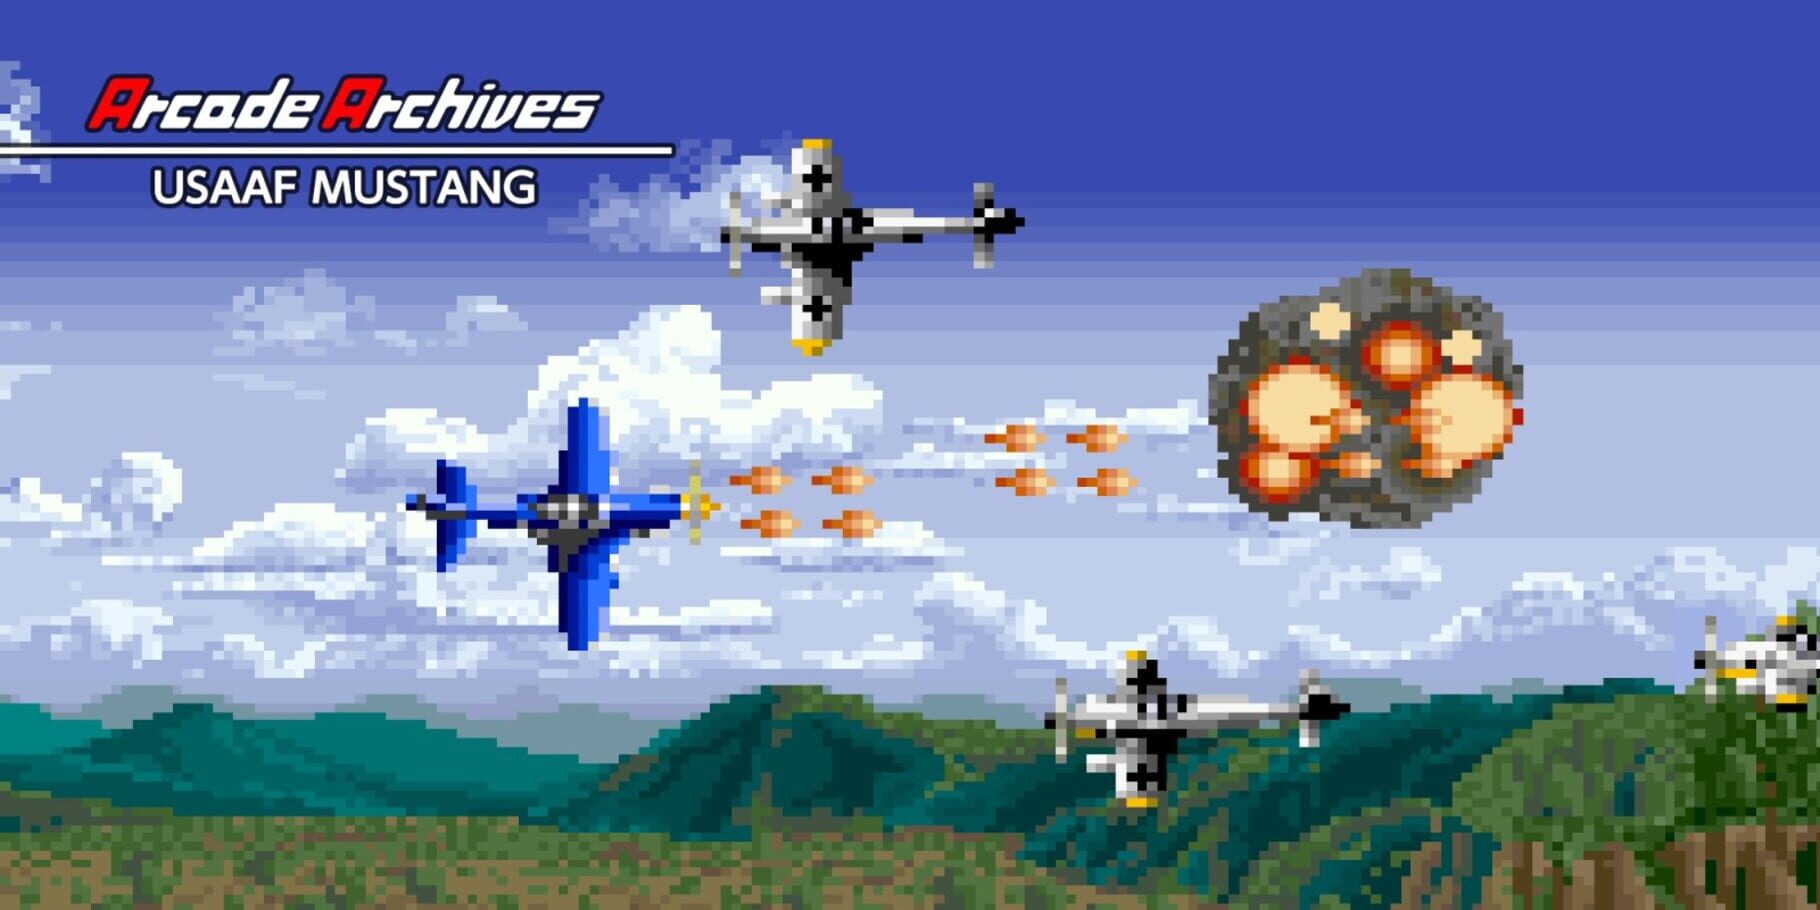 Arcade Archives: USAAF Mustang artwork